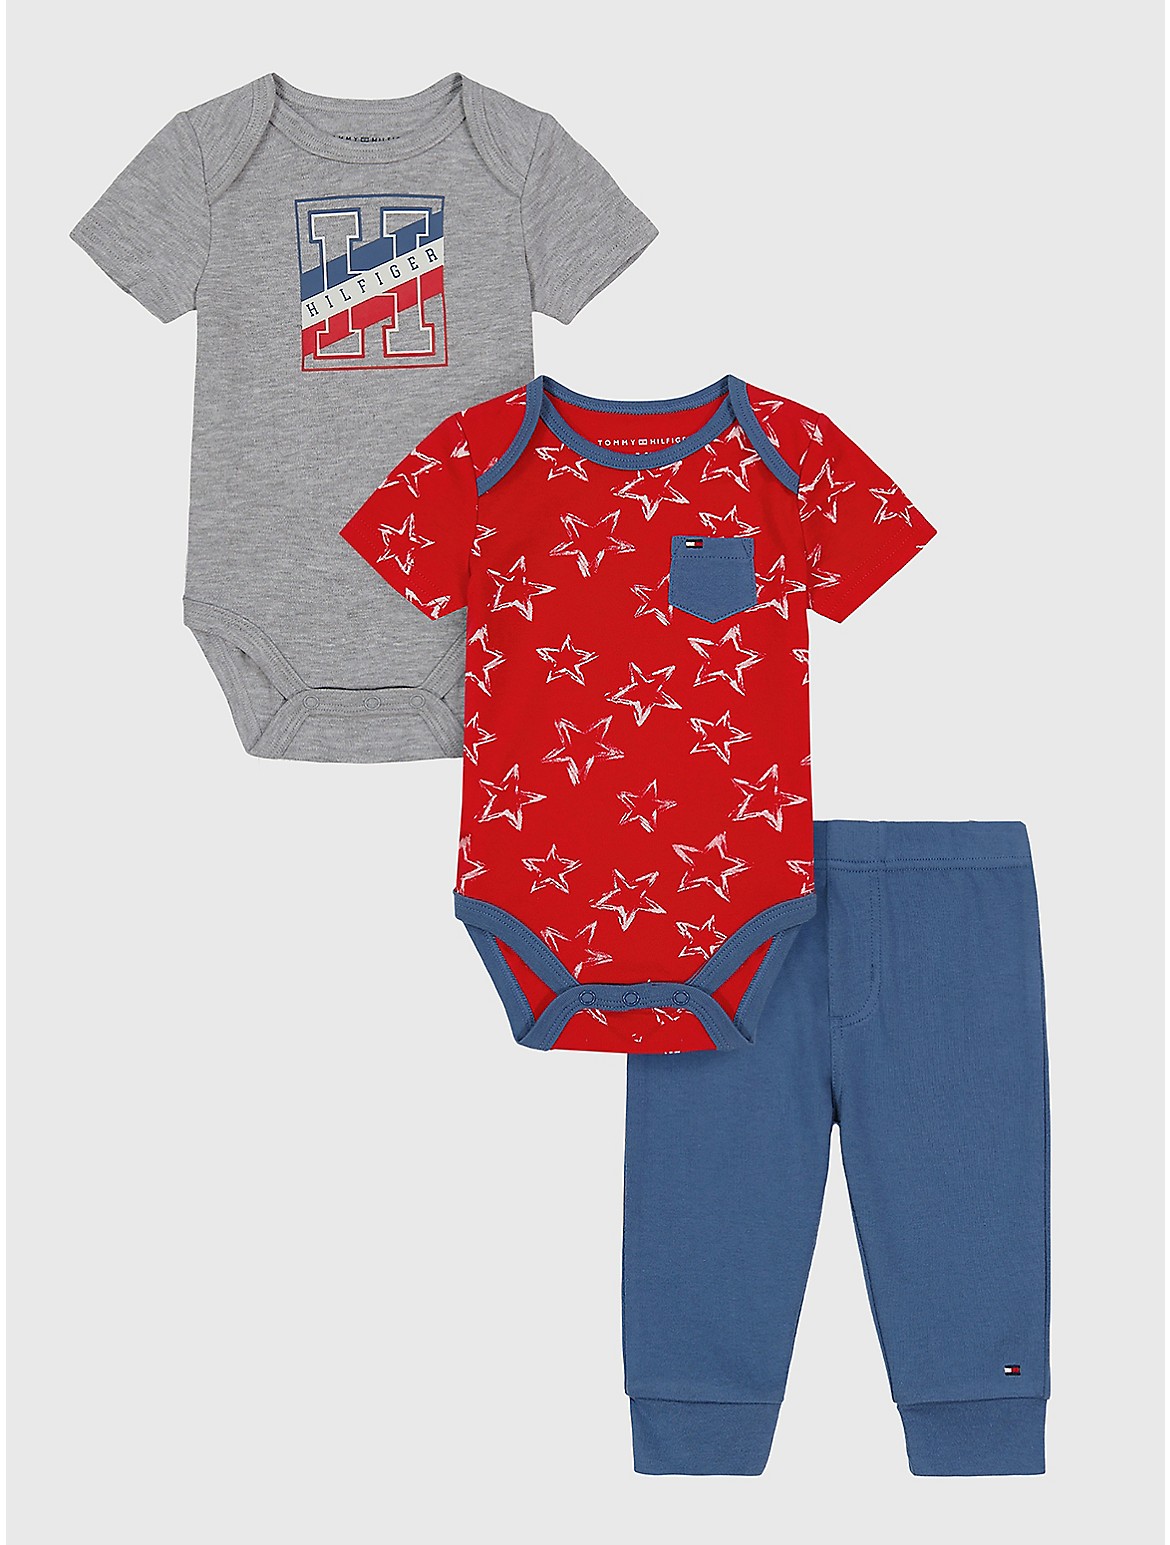 Tommy Hilfiger Boys' Toddlers' Onesie and Pant Set 3PC - Multi - 18M